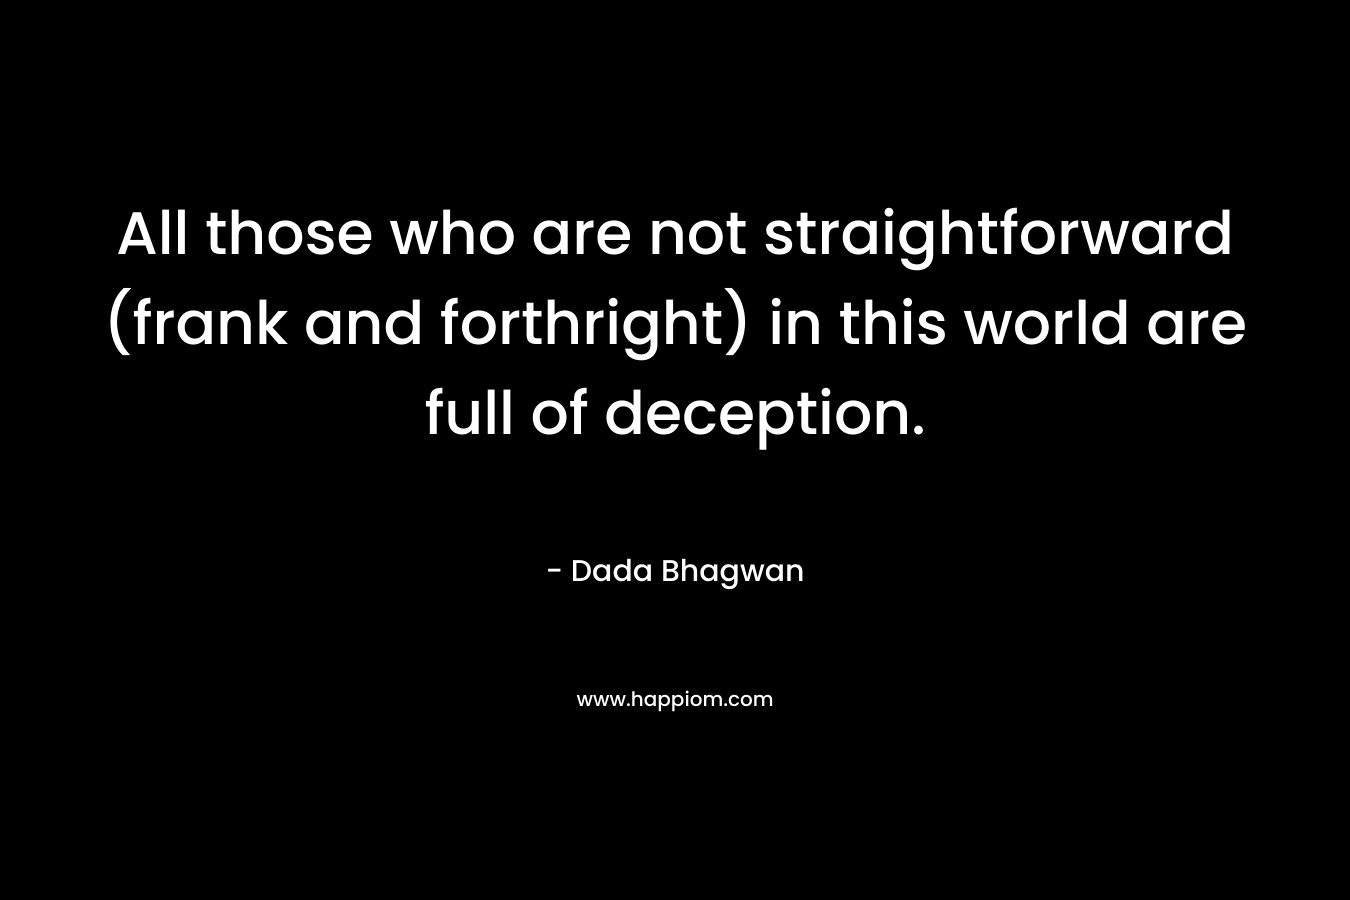 All those who are not straightforward (frank and forthright) in this world are full of deception. – Dada Bhagwan